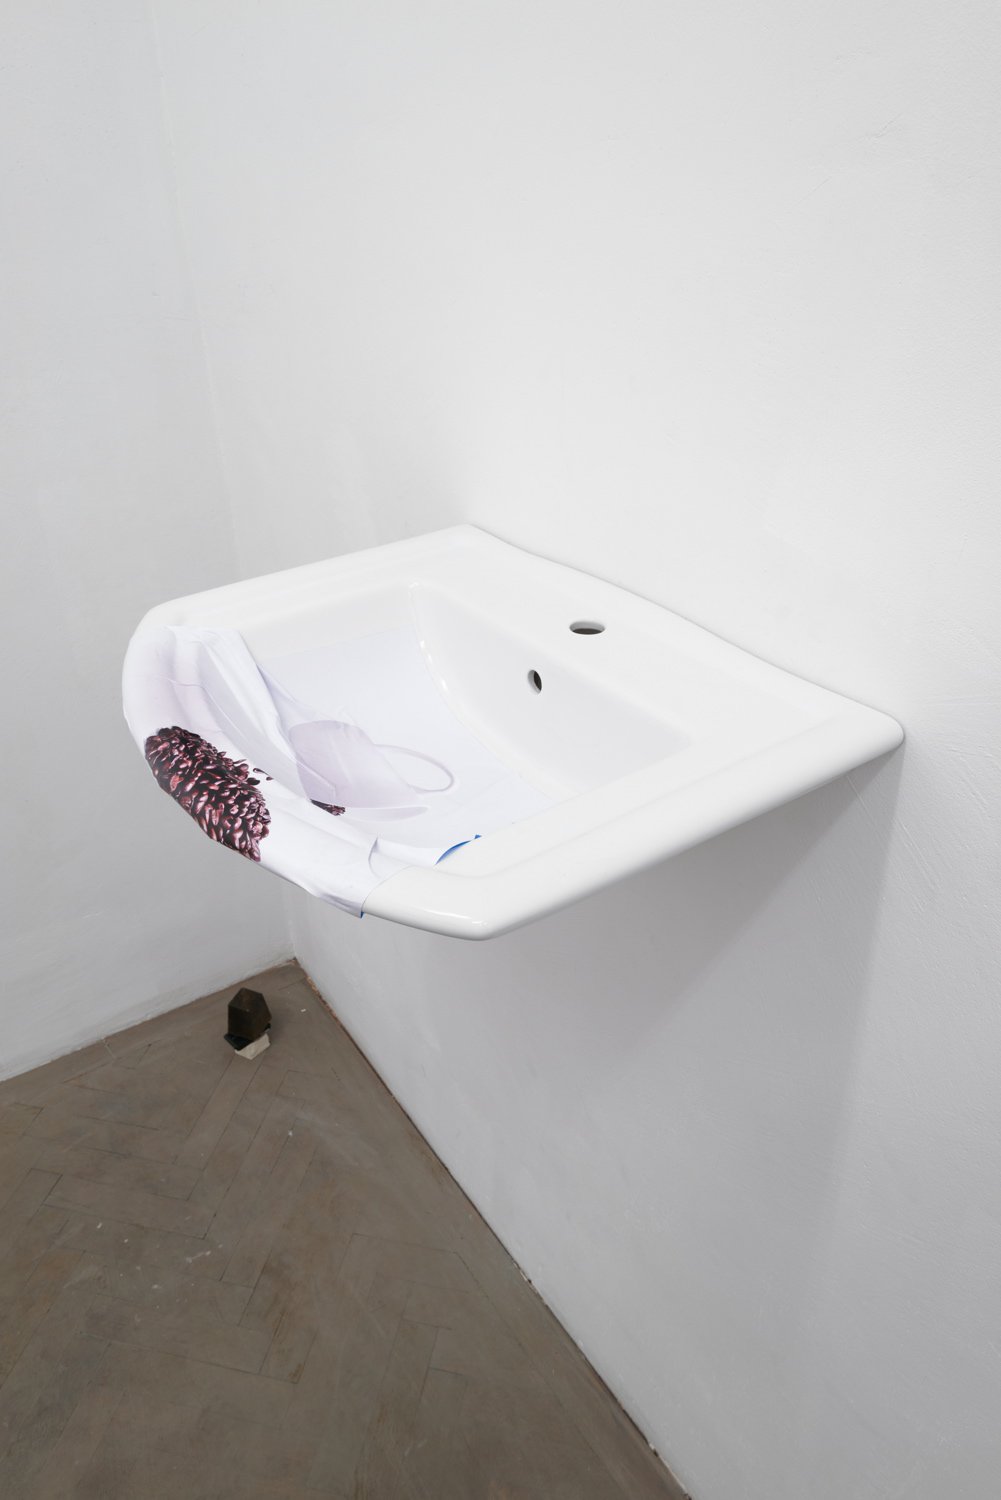 Nina BeierThe Demonstraters (Solid Coffee Spill), 2014Porcelain sink and paper51.5 x 66 x 21.3 cm